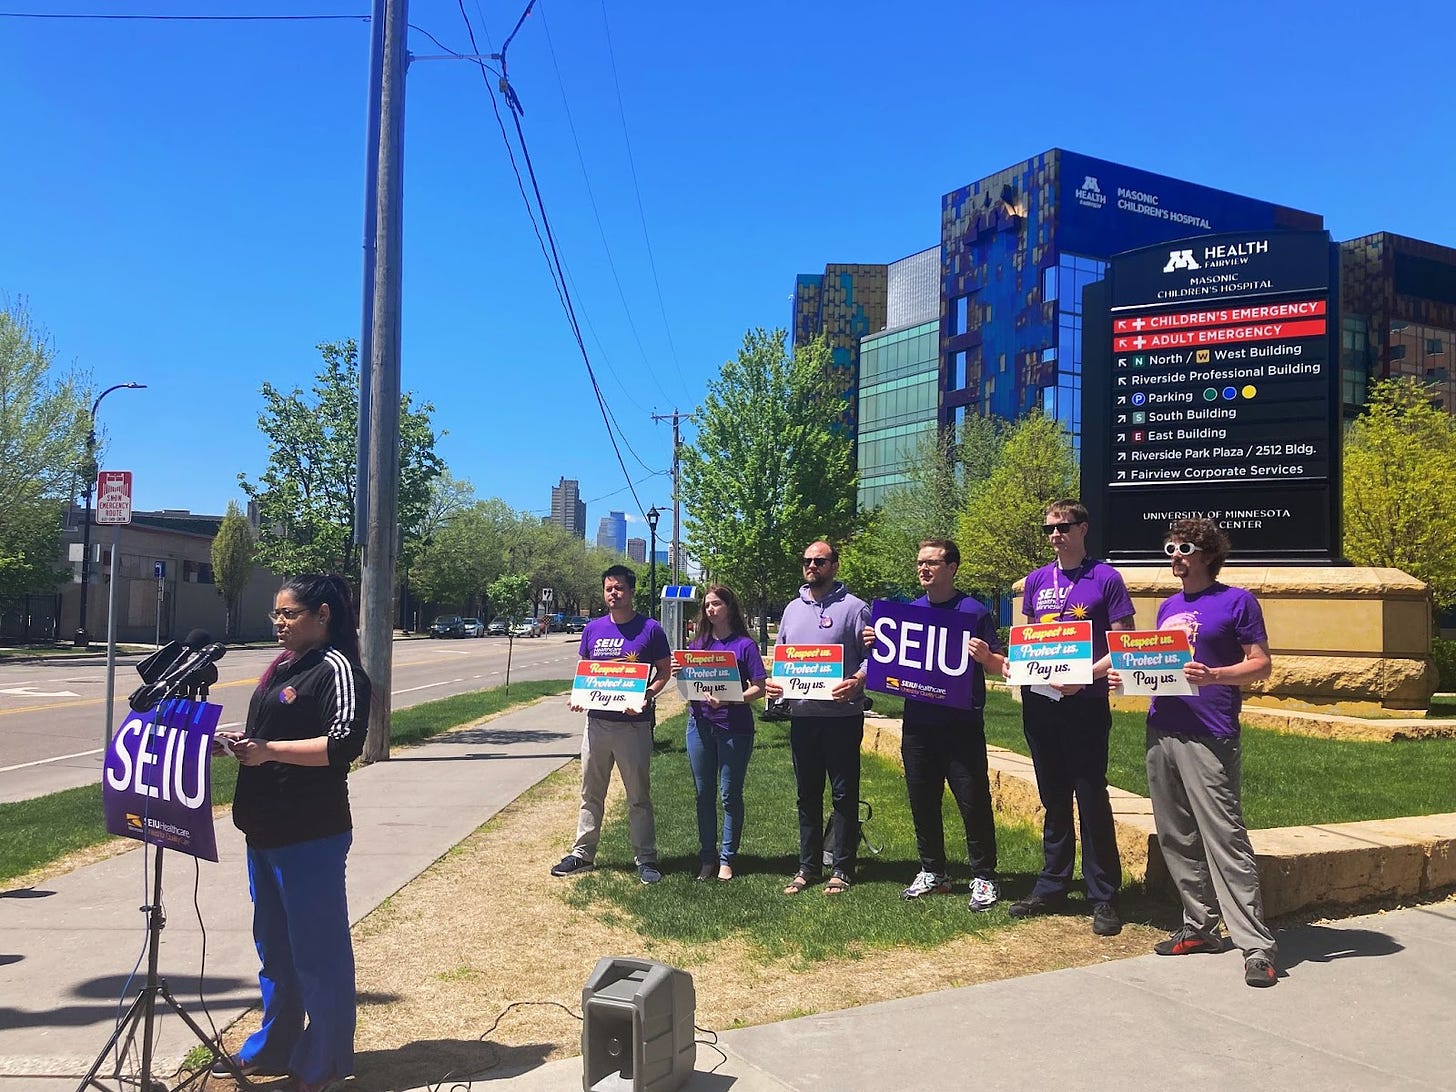 a small group of people wearing purple shirts and holding SEIU signs and signs saying "respect us protect us pay us" stand outside of a blue hospital building on the sidewalk